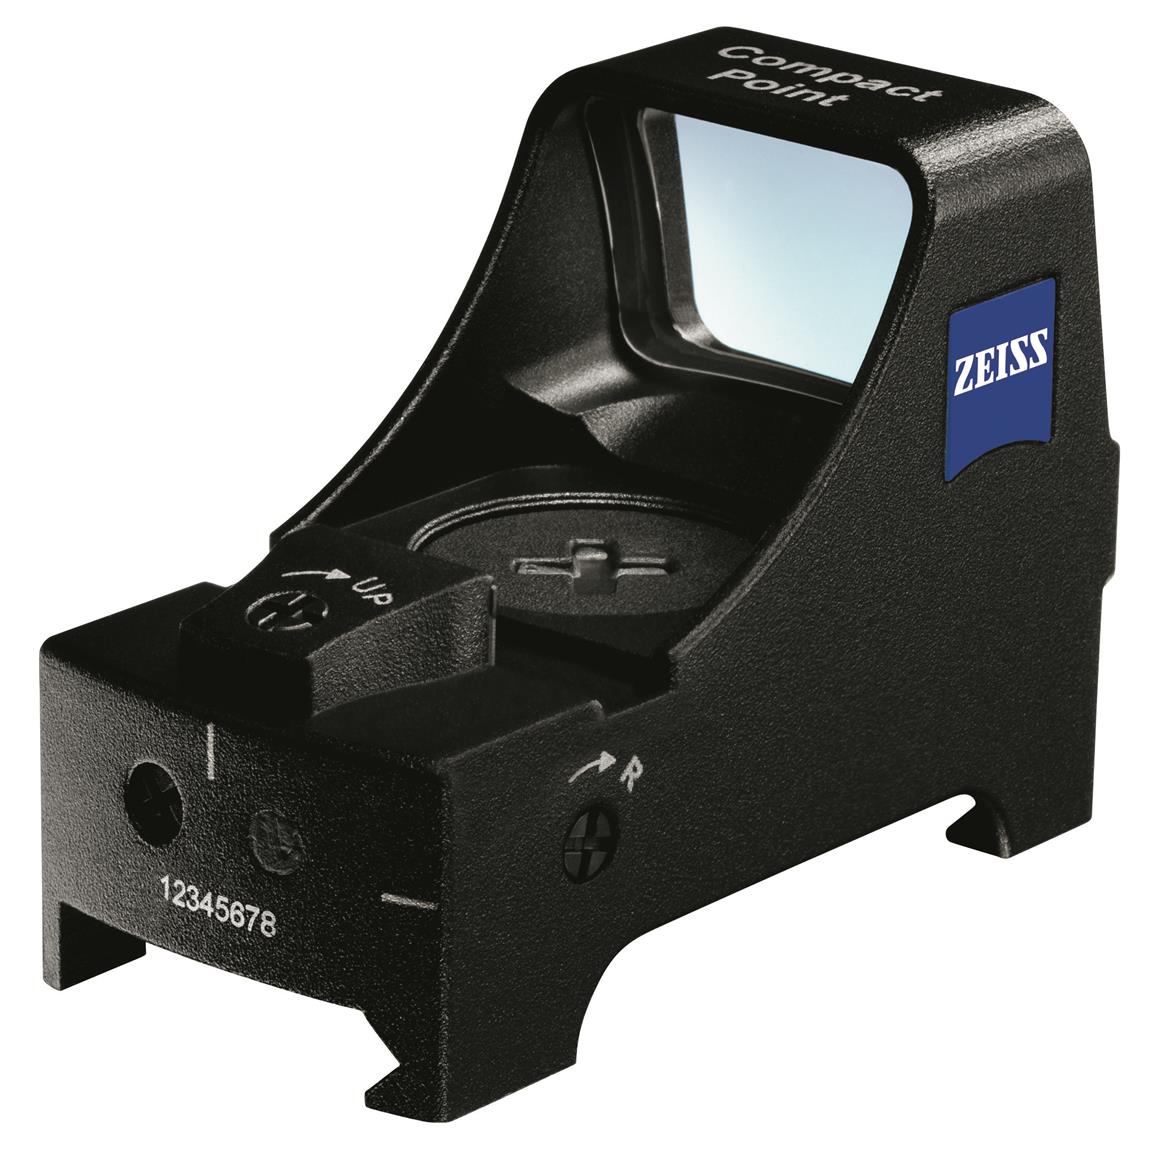 Bourgeon Stolpe Signal ZEISS Victory Compact Point Standard Red Dot Reflex Sight, Waterproof -  676158, Holographic & Reflex Sights at Sportsman's Guide